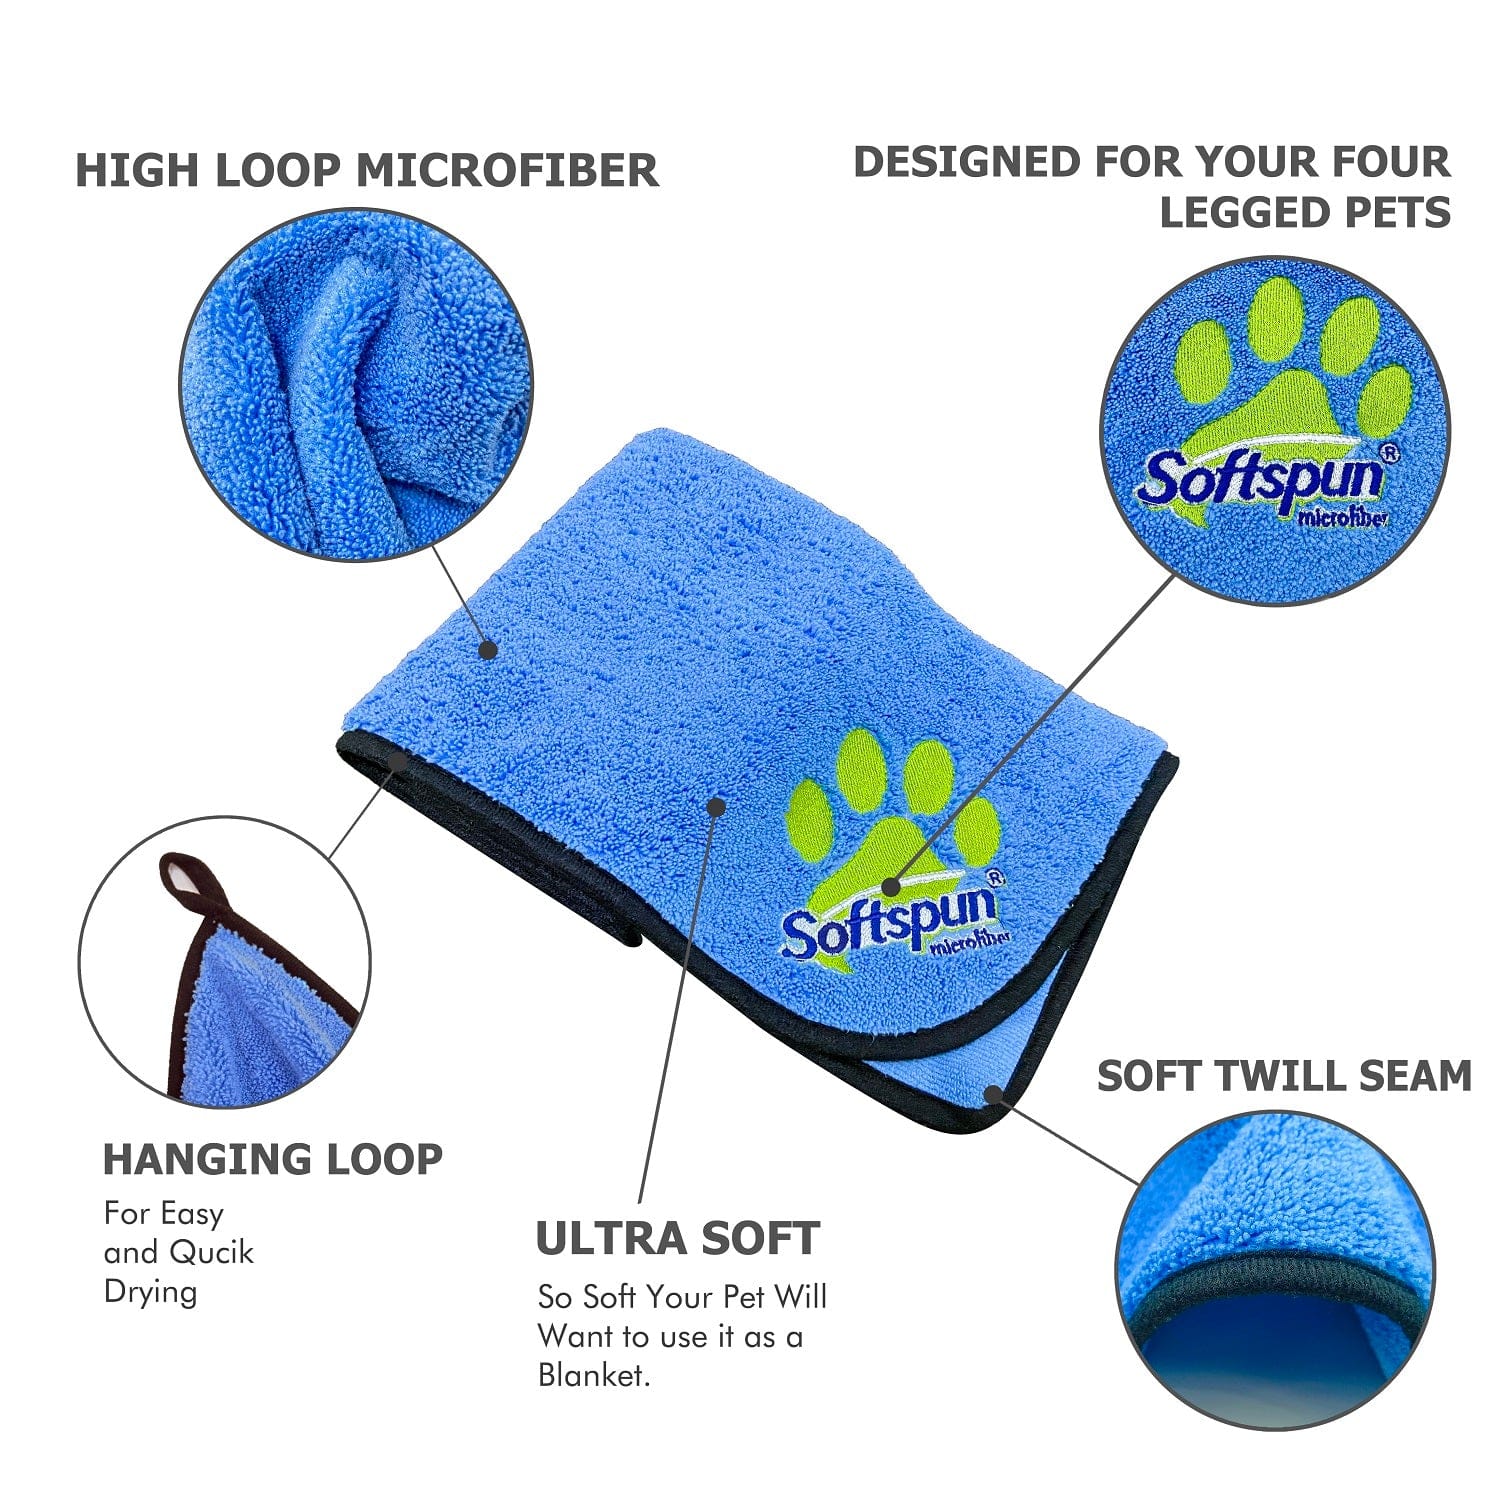 SOFTSPUN Microfiber Pet Towel 380 GSM. Ultra-Absorbent for Drying Pets Quickly. Quick-Drying, Machine Washable, Ultra-Soft for Small Dogs & Cats of All Breeds.